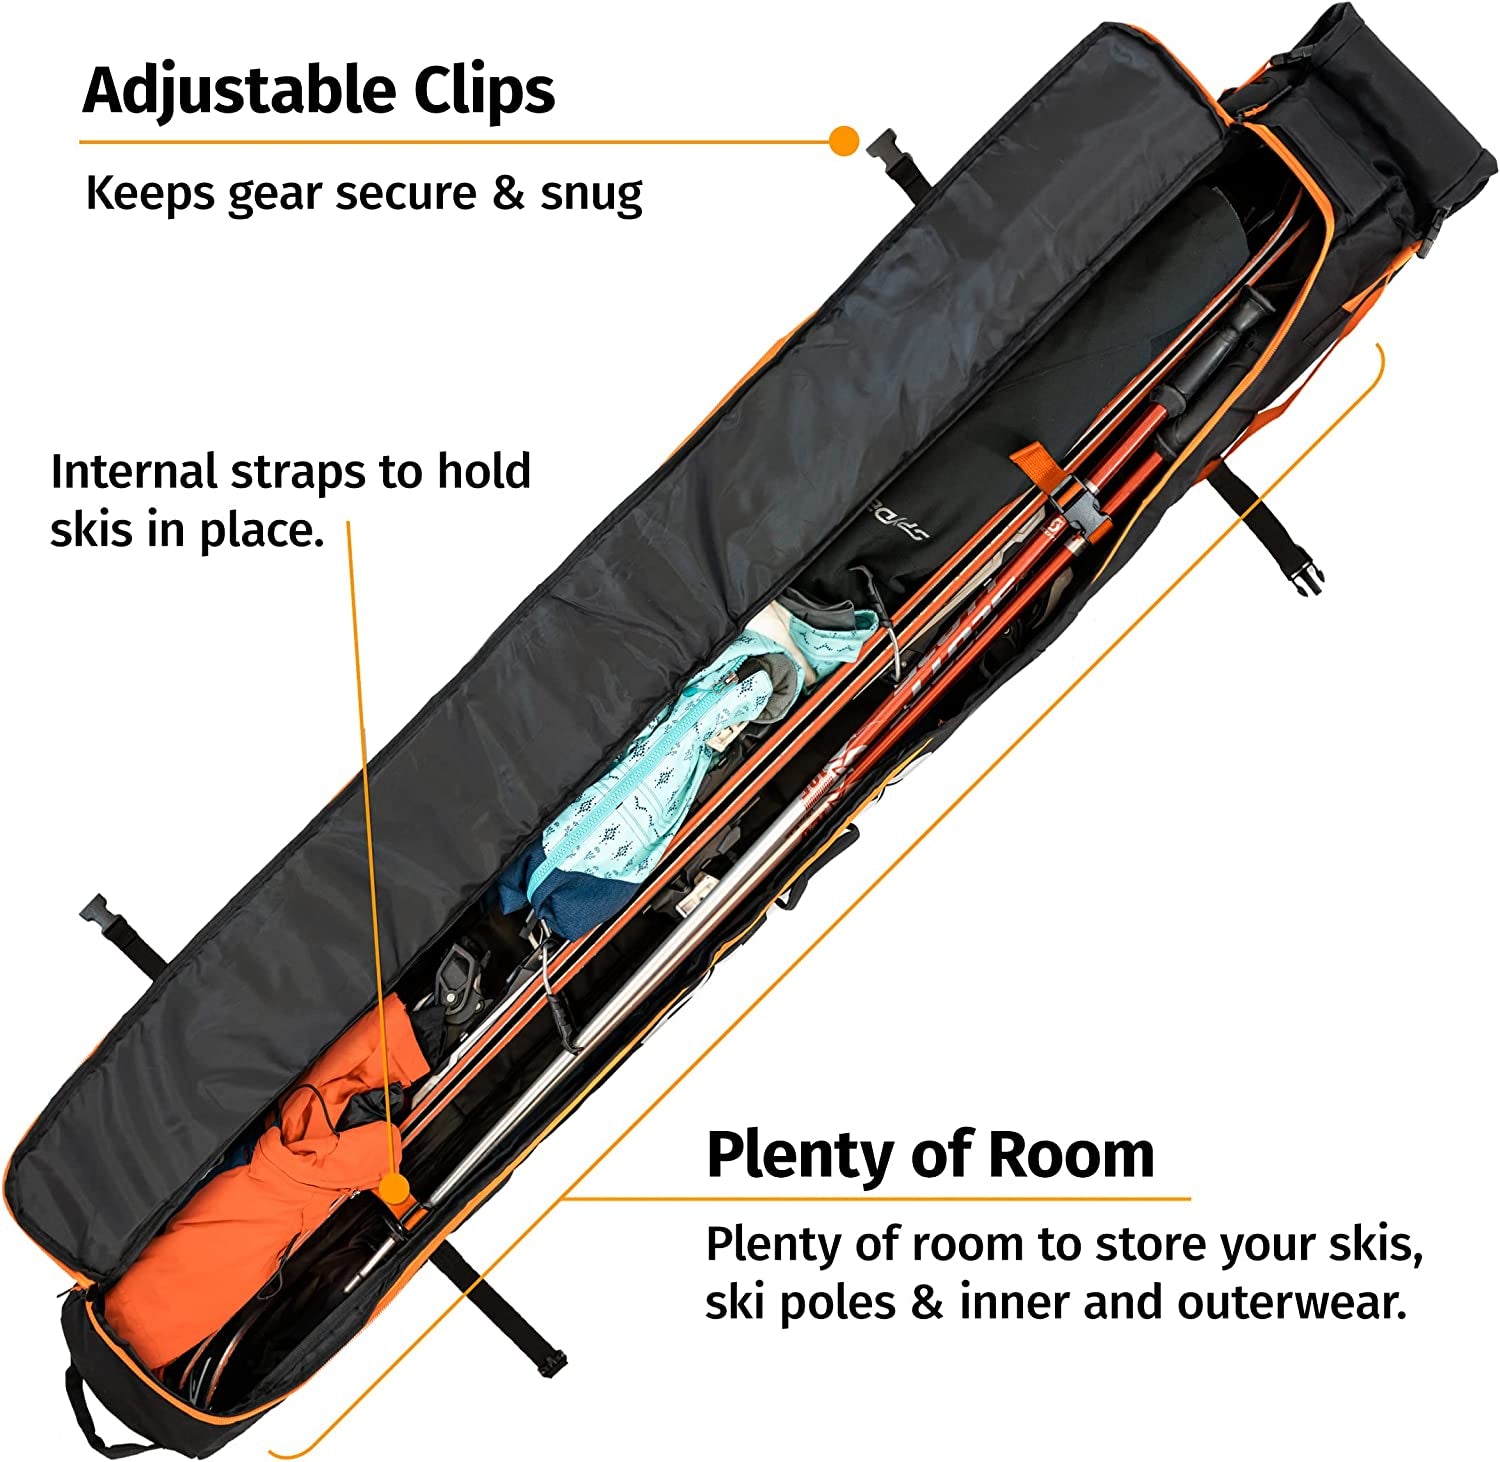 Ski Bag and Ski Boot Bag Combo for Air Travel Unpadded - Ski Luggage Bags for Snow Travel Gear - Ski Case for Cross Country, Downhill, Boots, Helmet, Poles, Clothes and Accessories